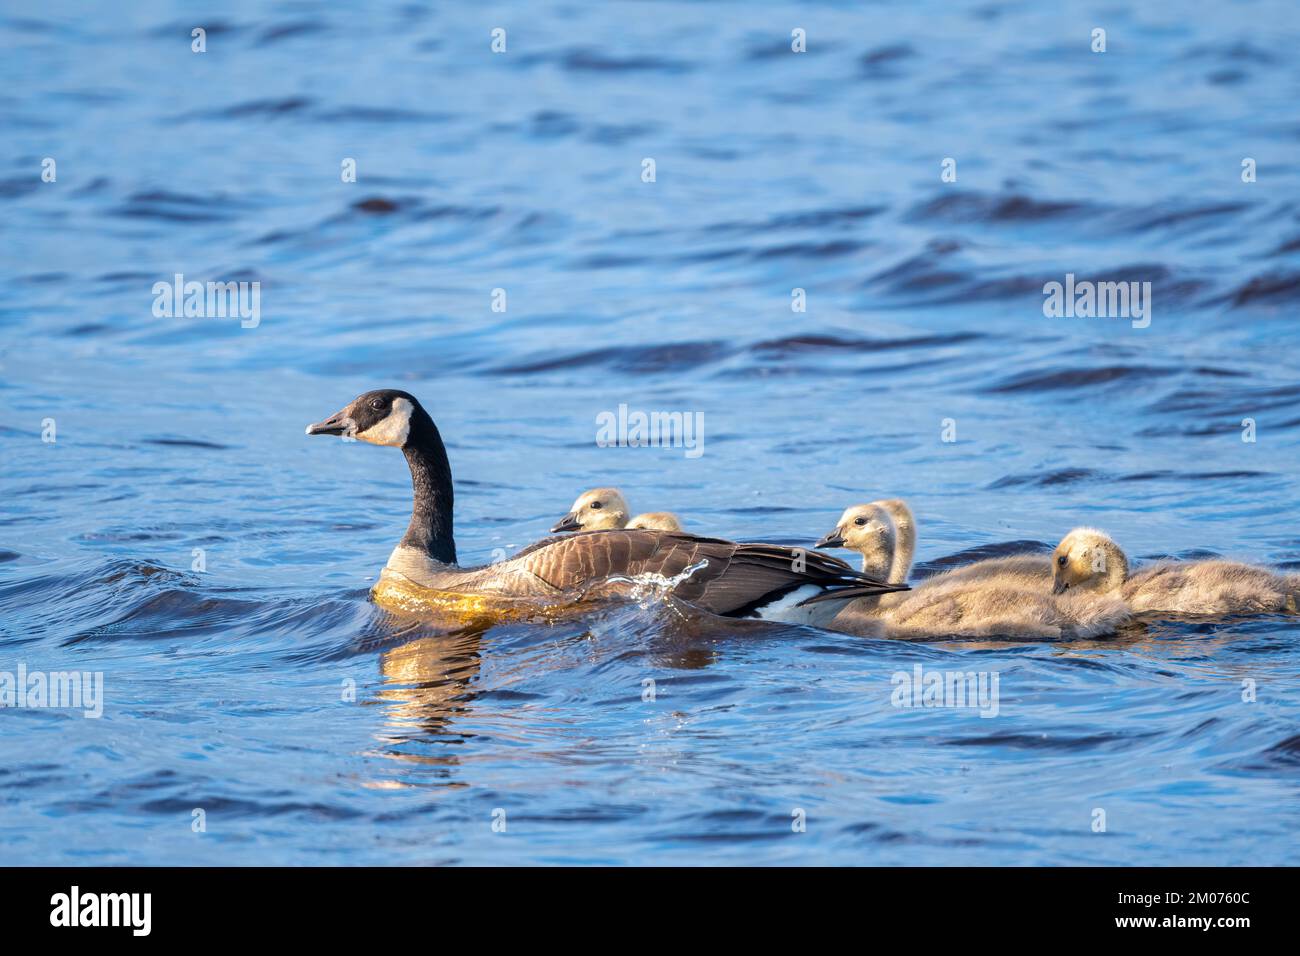 Canada goose (Branta canadensis) and goslings., North America, by Dominique Braud/Dembinsky Photo Assoc Stock Photo